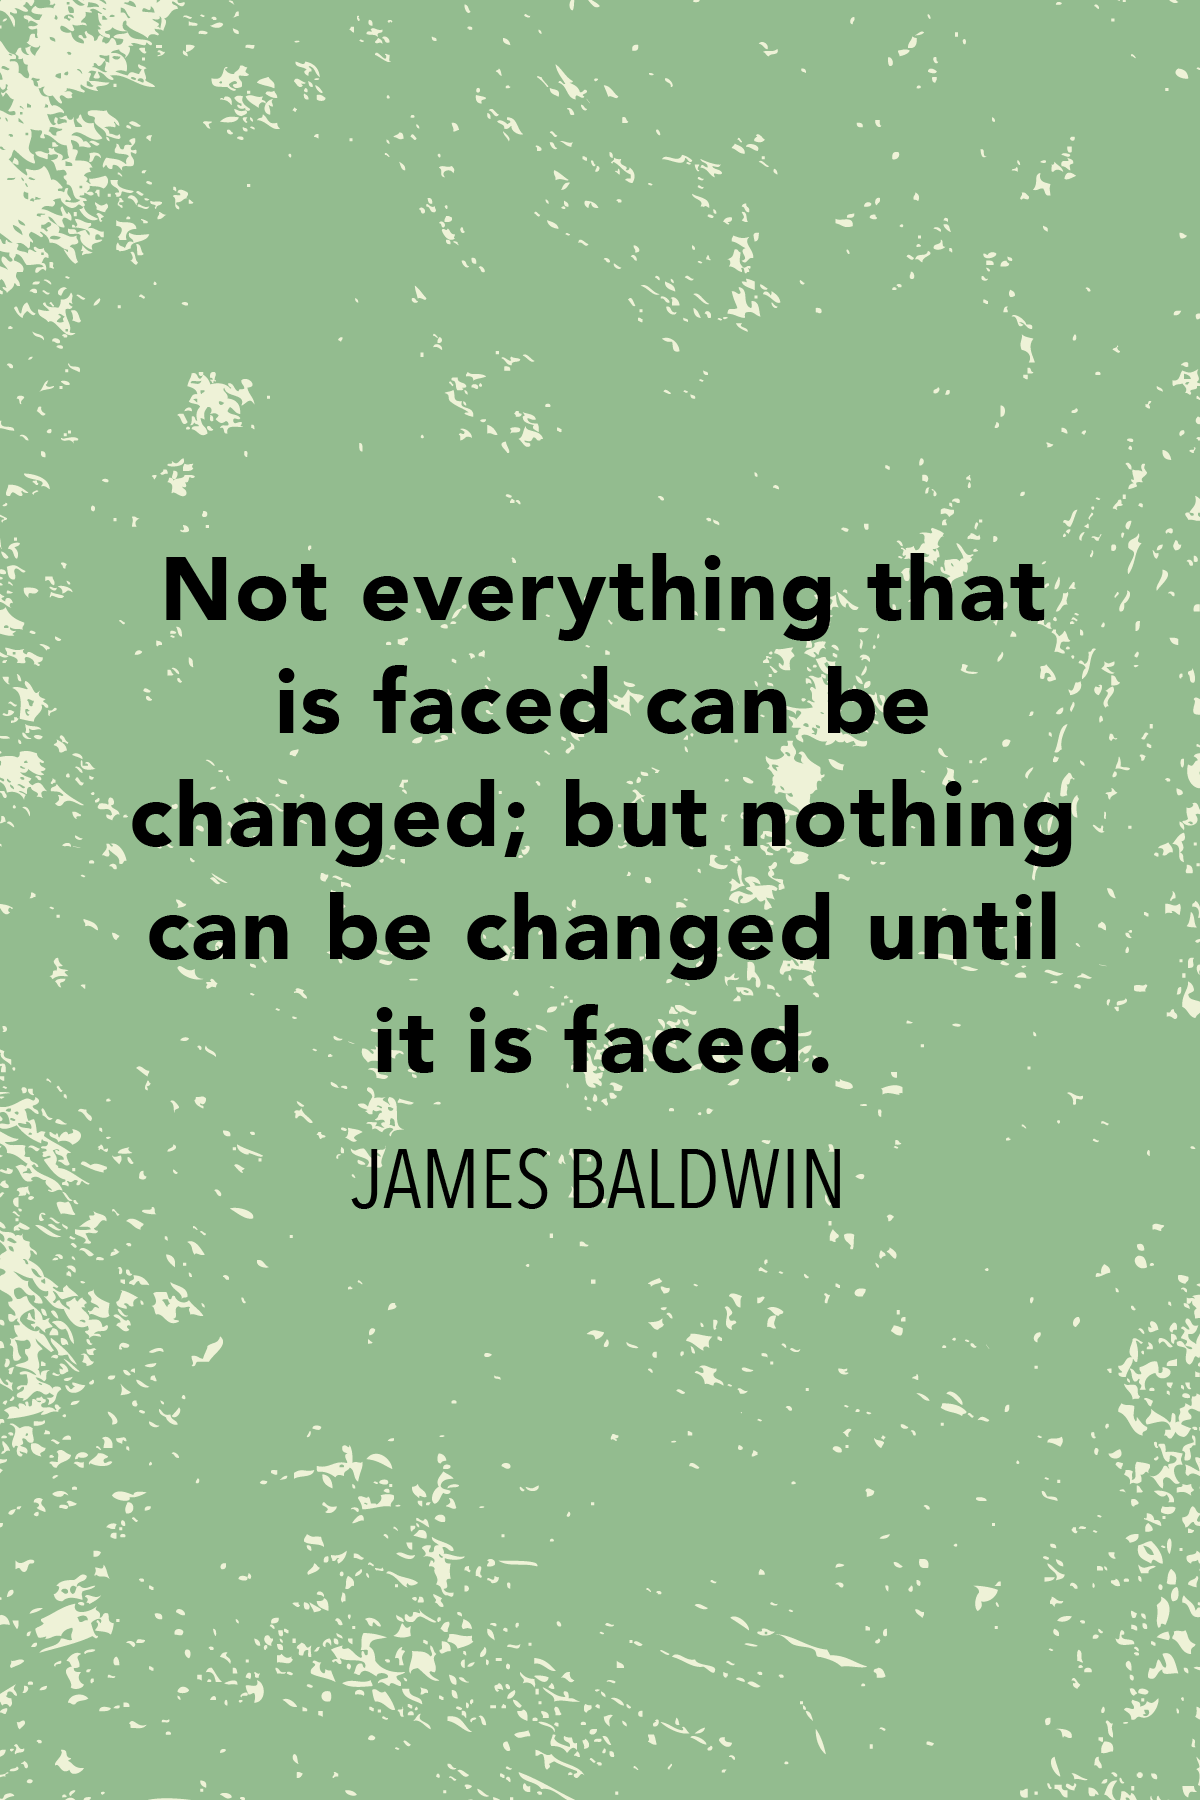 35 James Baldwin Quotes on Love, Oppression, and Equality